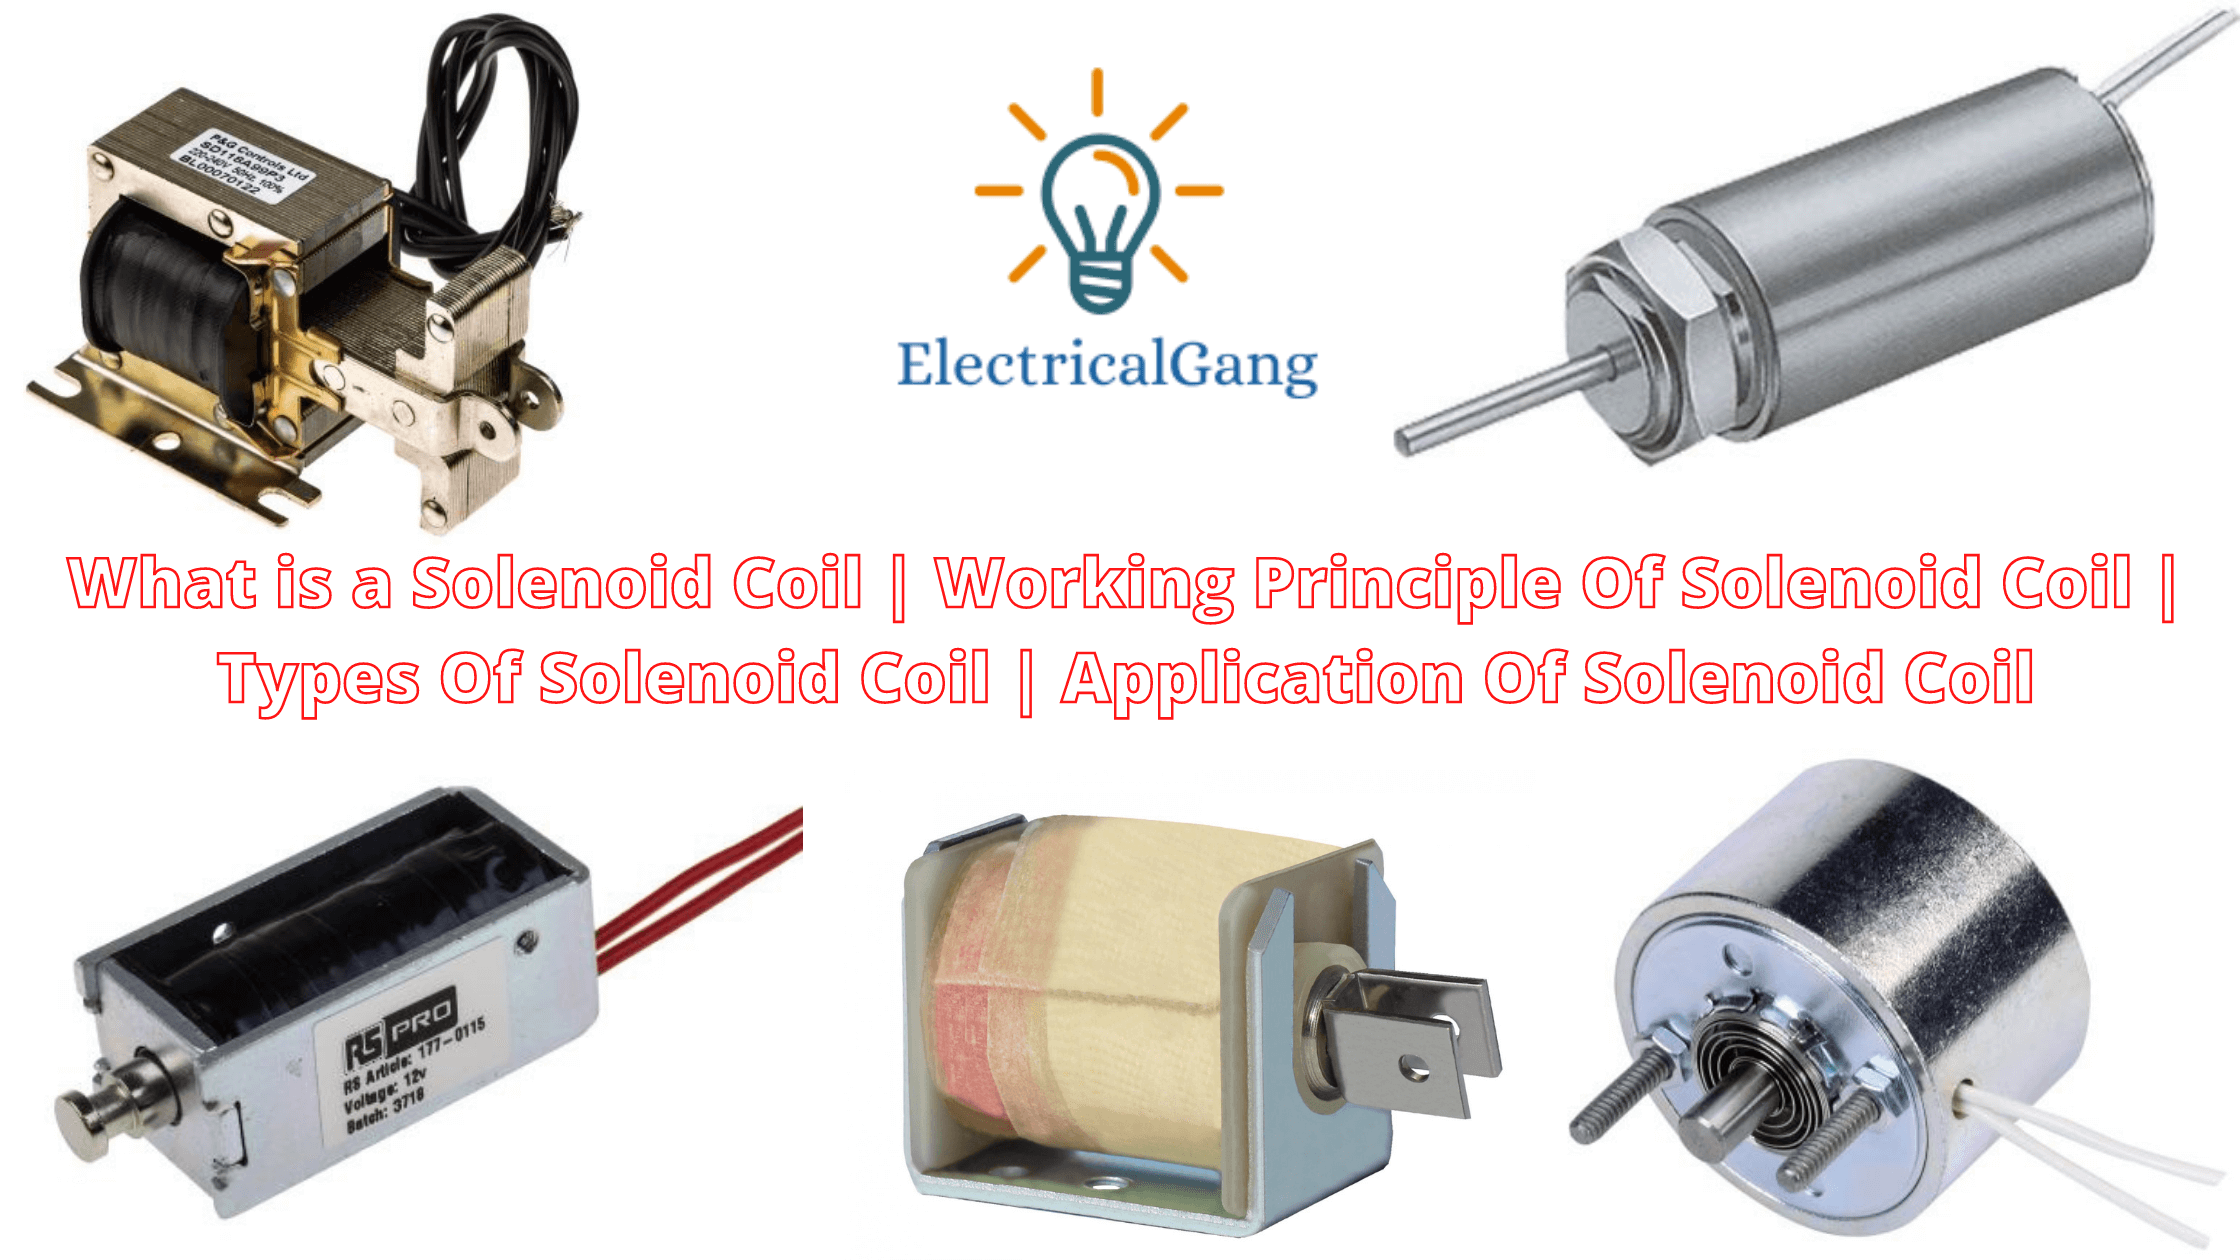 https://electricalgang.com/wp-content/uploads/2020/12/Types-Of-Solenoid-Coil.png